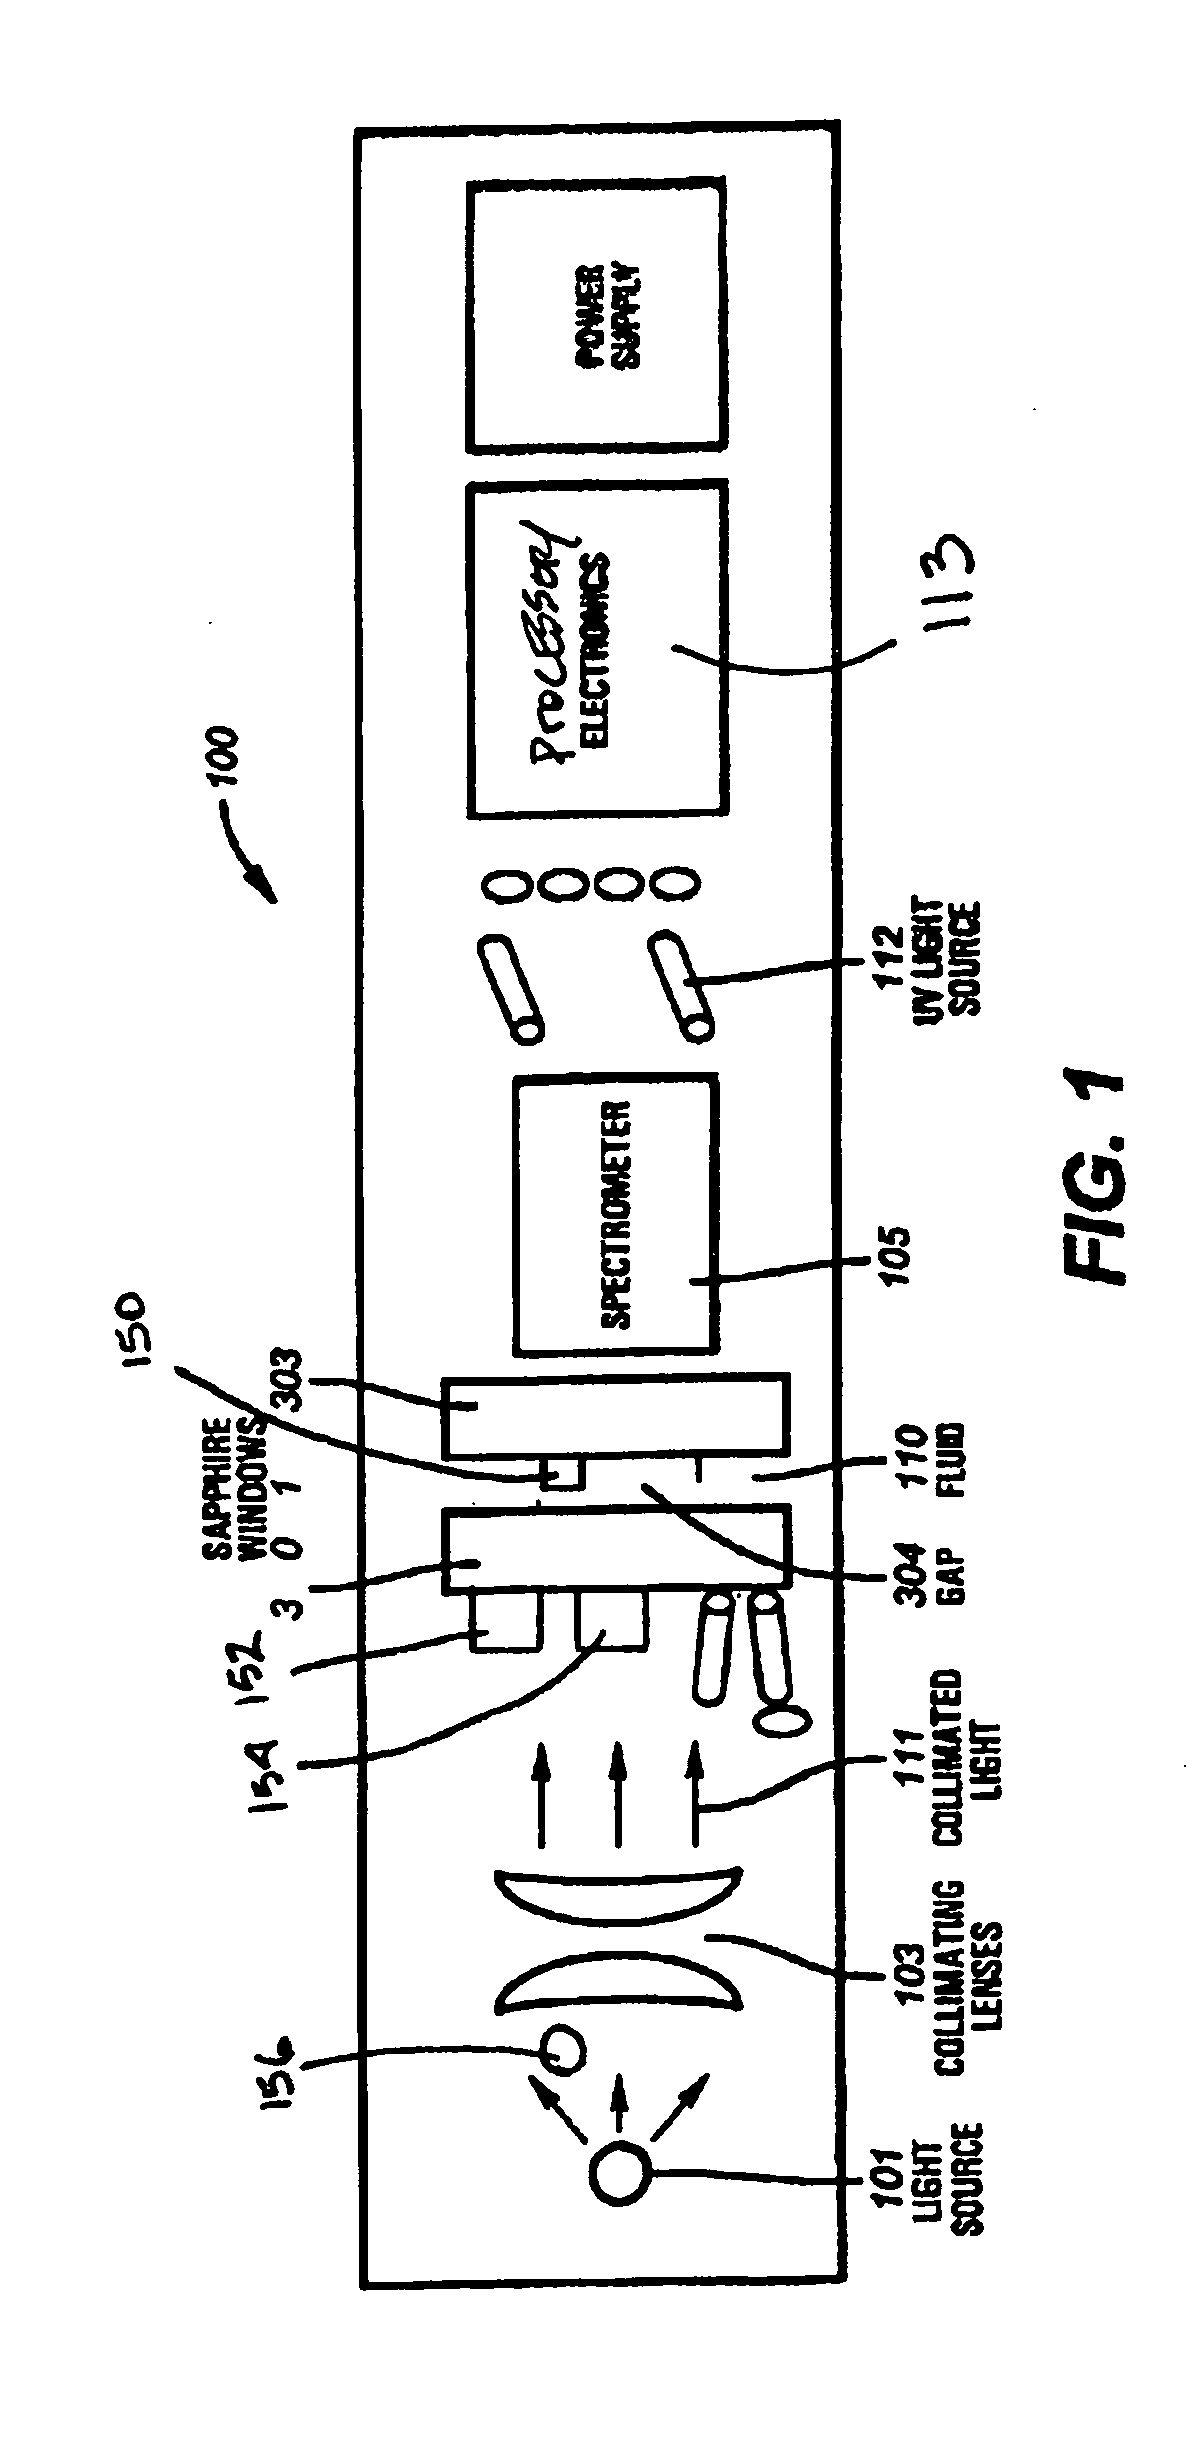 Method and apparatus for estimating of fluid contamination downhole